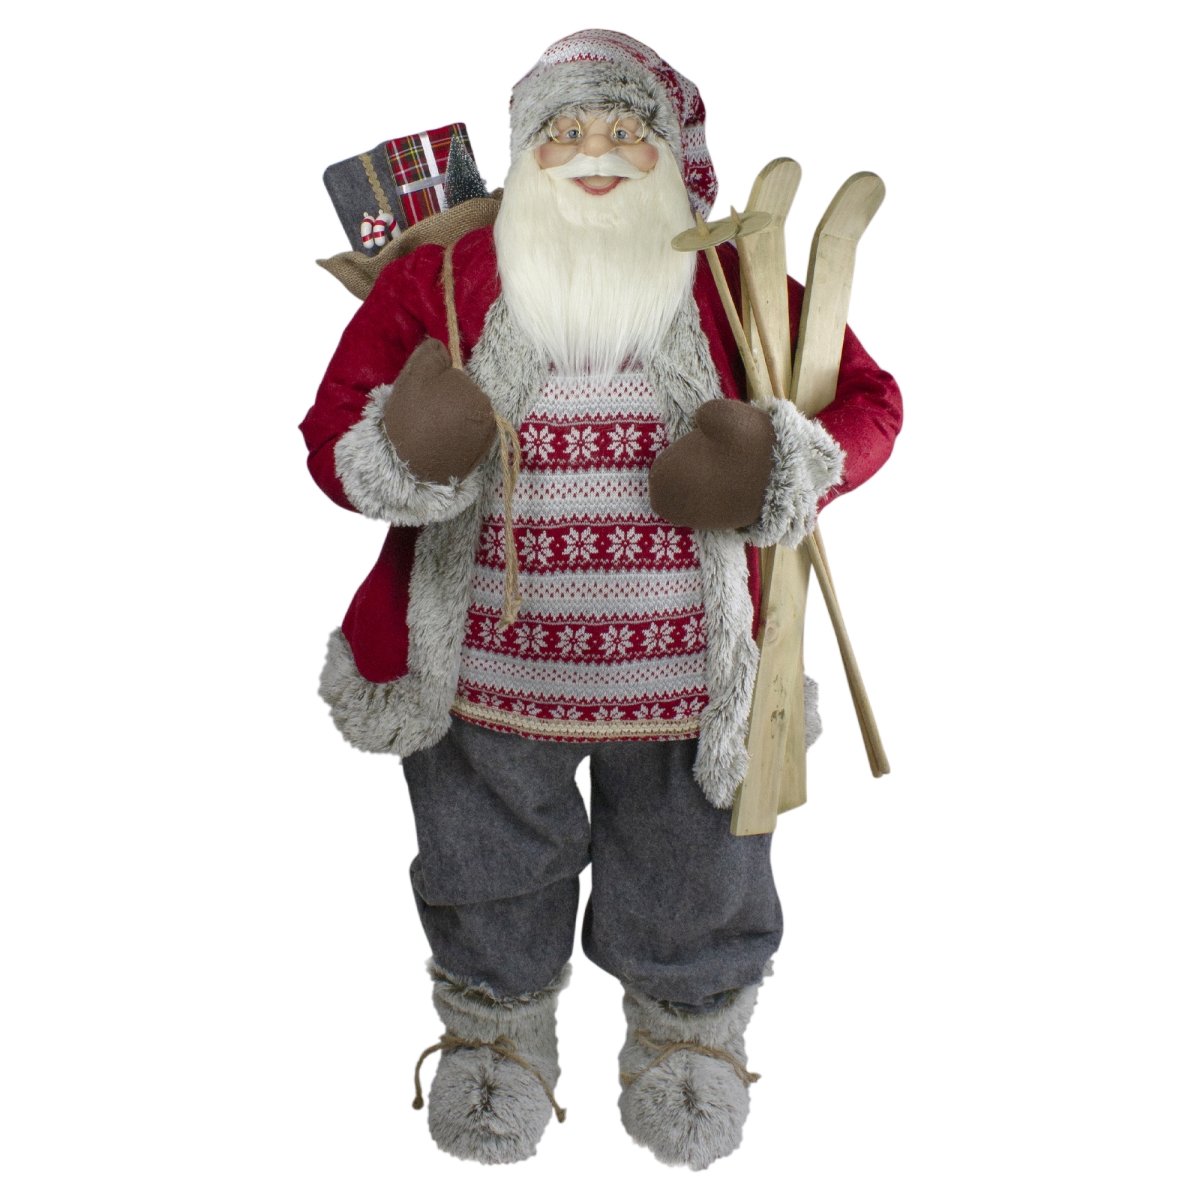 Picture of Northlight 34316604 4 ft. Standing Santa Christmas Figure with Skis & Fur Boots